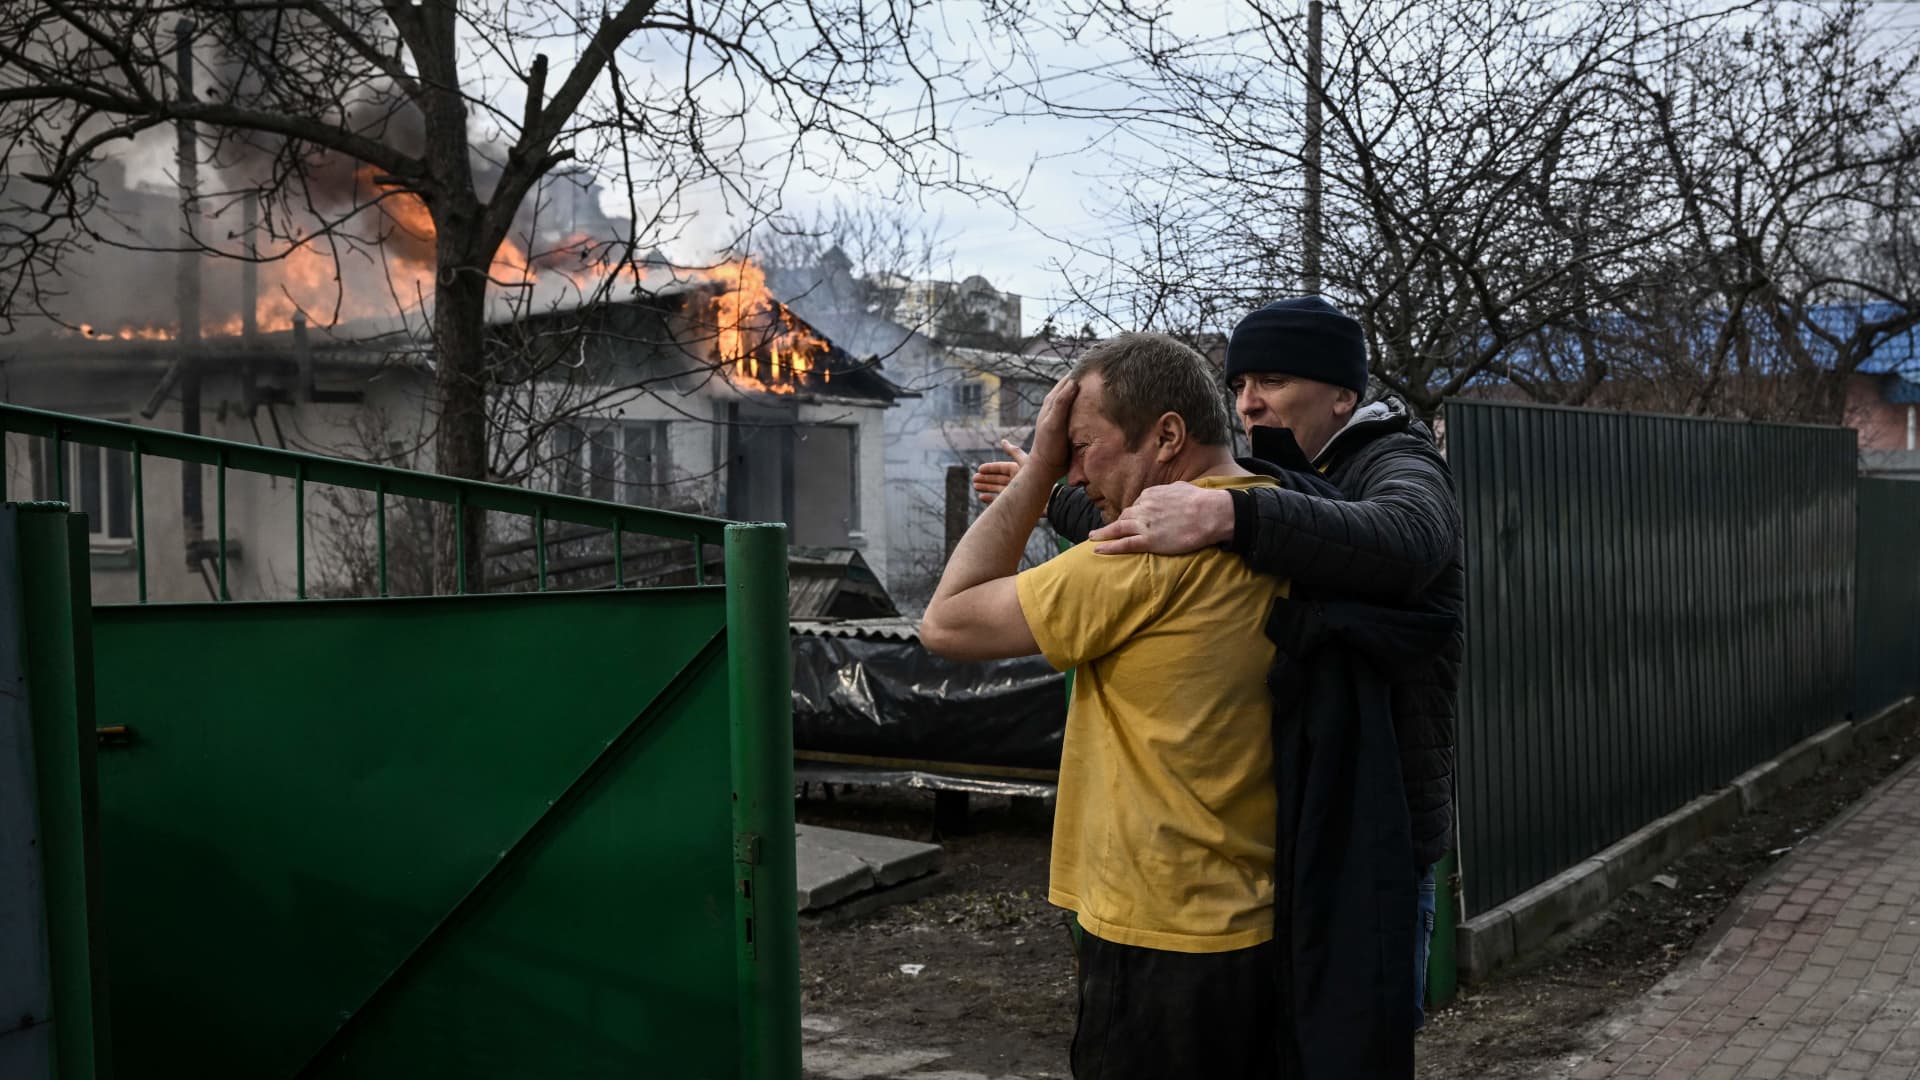 Yevghen Zbormyrsky, 49, is comfirted as he stands in front of his burning home after it was hit by a shelled in the city of Irpin, outside Kyiv, on March 4, 2022. 